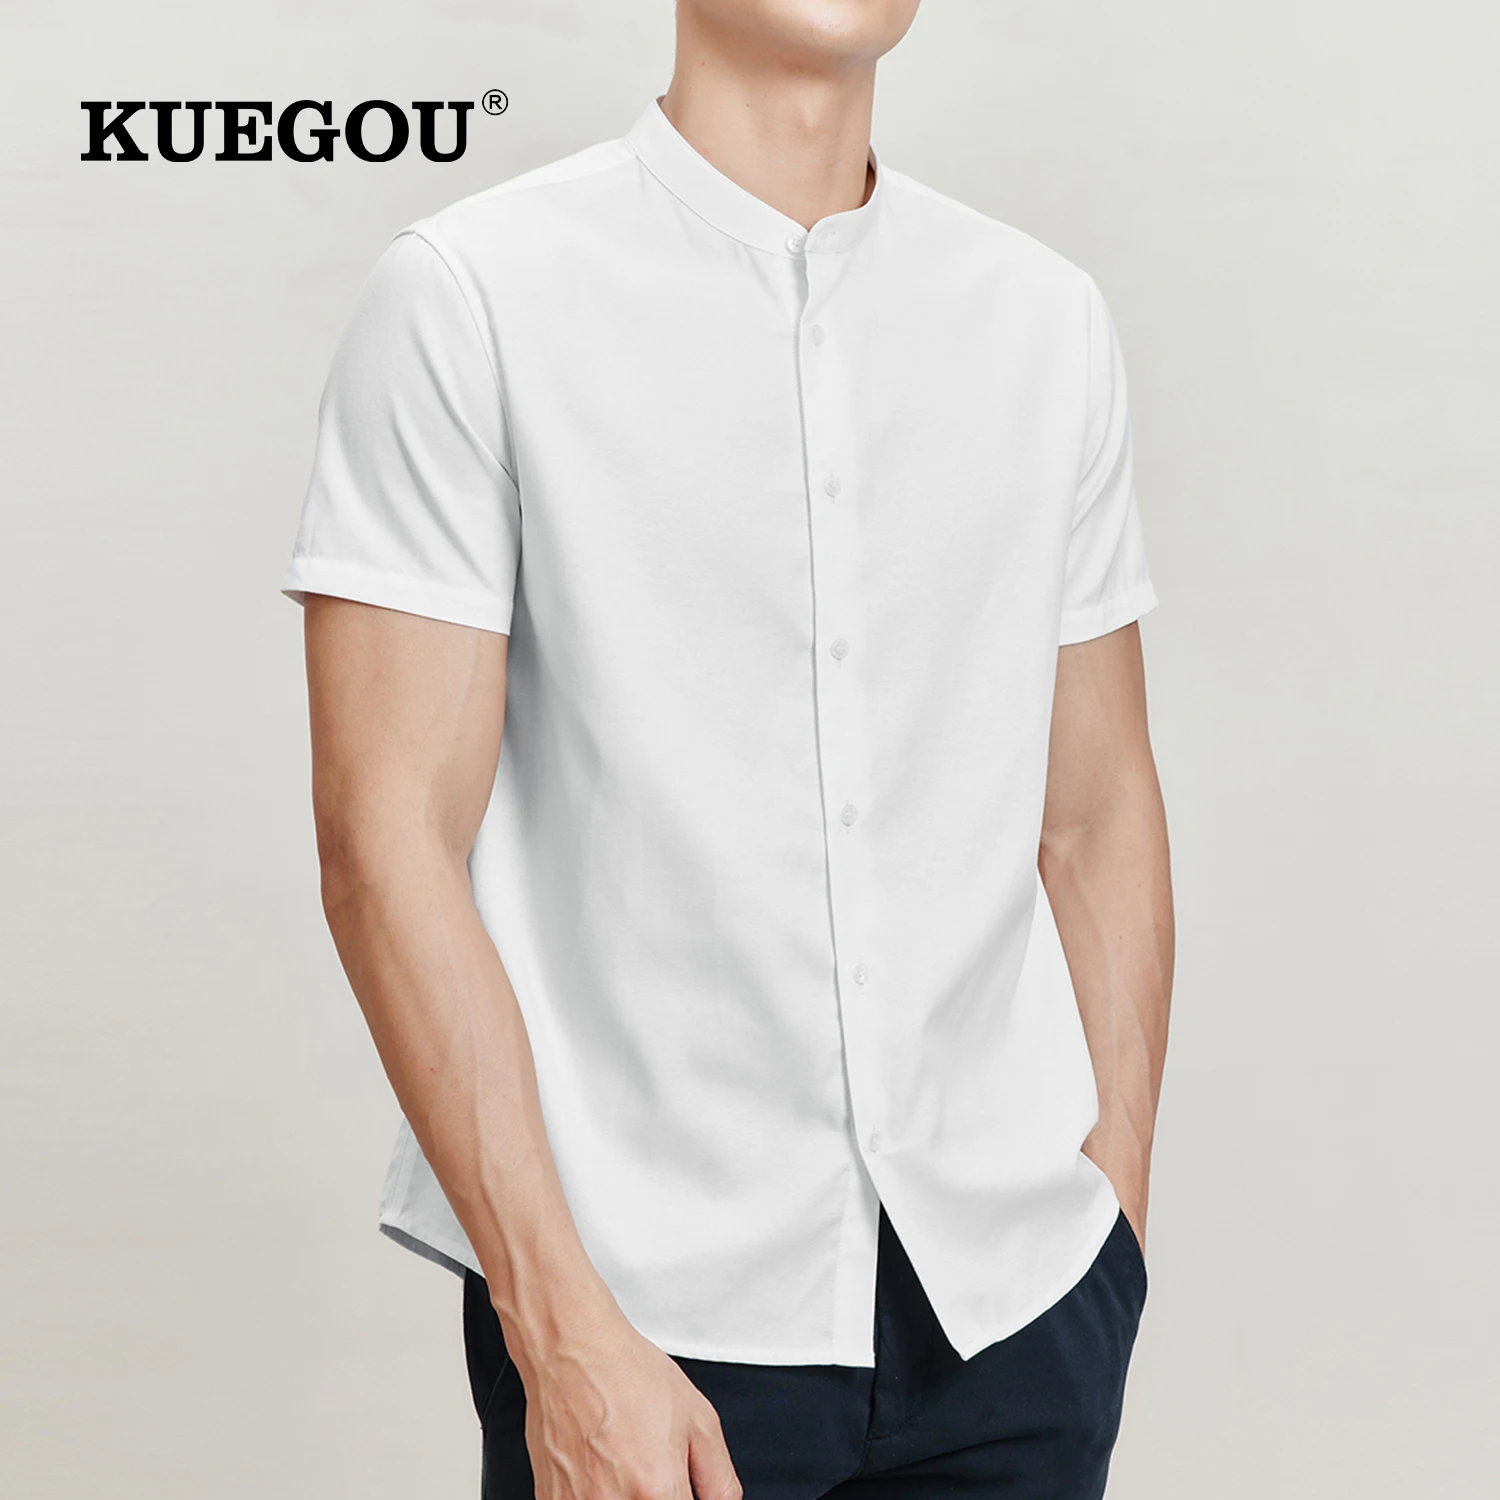 

KUEGOU Lyocell Cotton Man Shirt Short Sleeve 2022 Summer New Fashion Shirts Solid Color for Men White Black Top Plus Size 21529